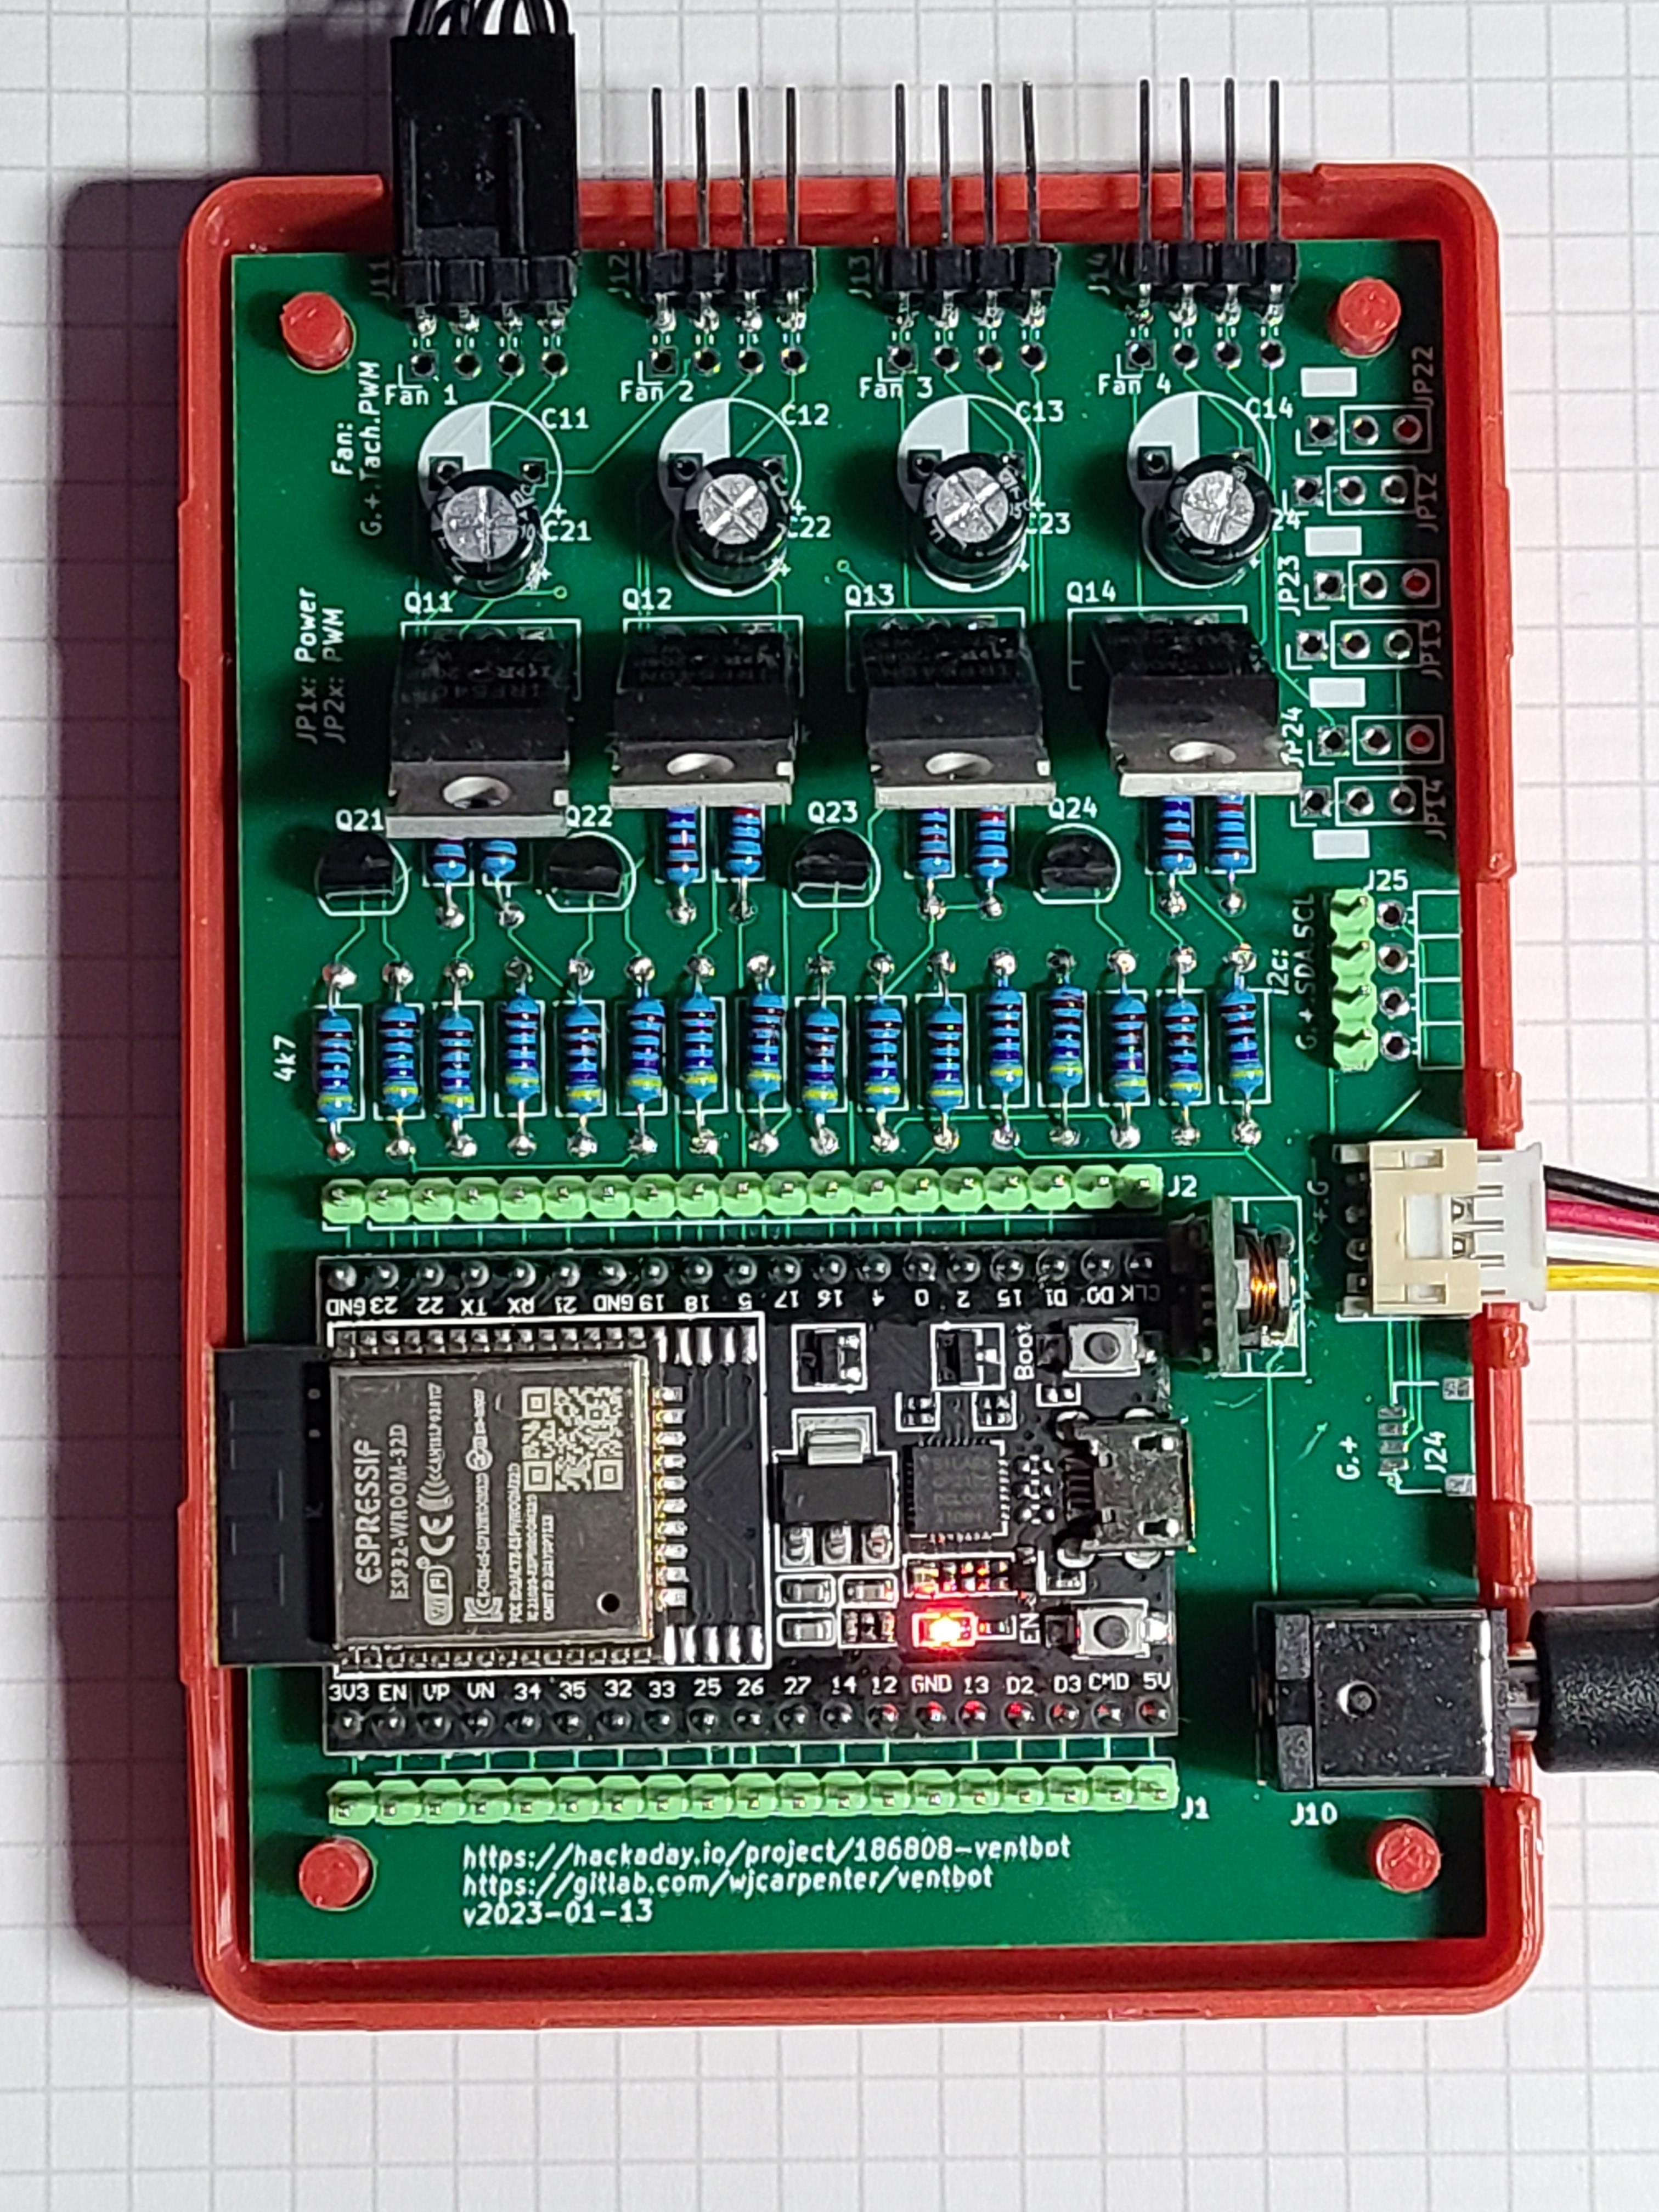 Ventbot control circuit board with ESP32 breakout in a red 3D printed case